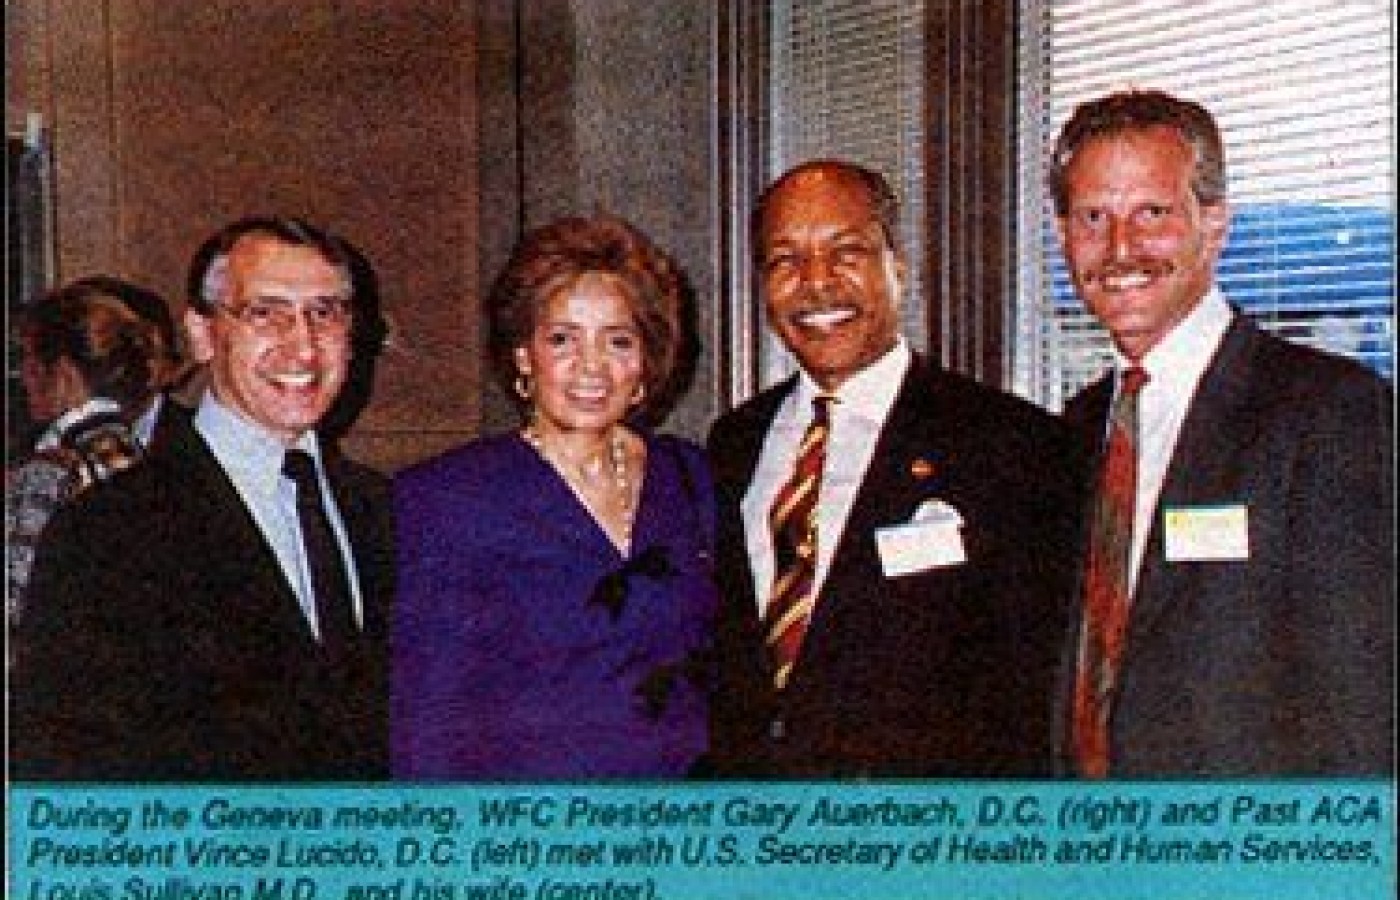 WFC President Gary Auerbach DC, Past ACA President Vince Lucido DC, and US Secretary of Health and Human Services Louis Sullivan MD, and his wife.